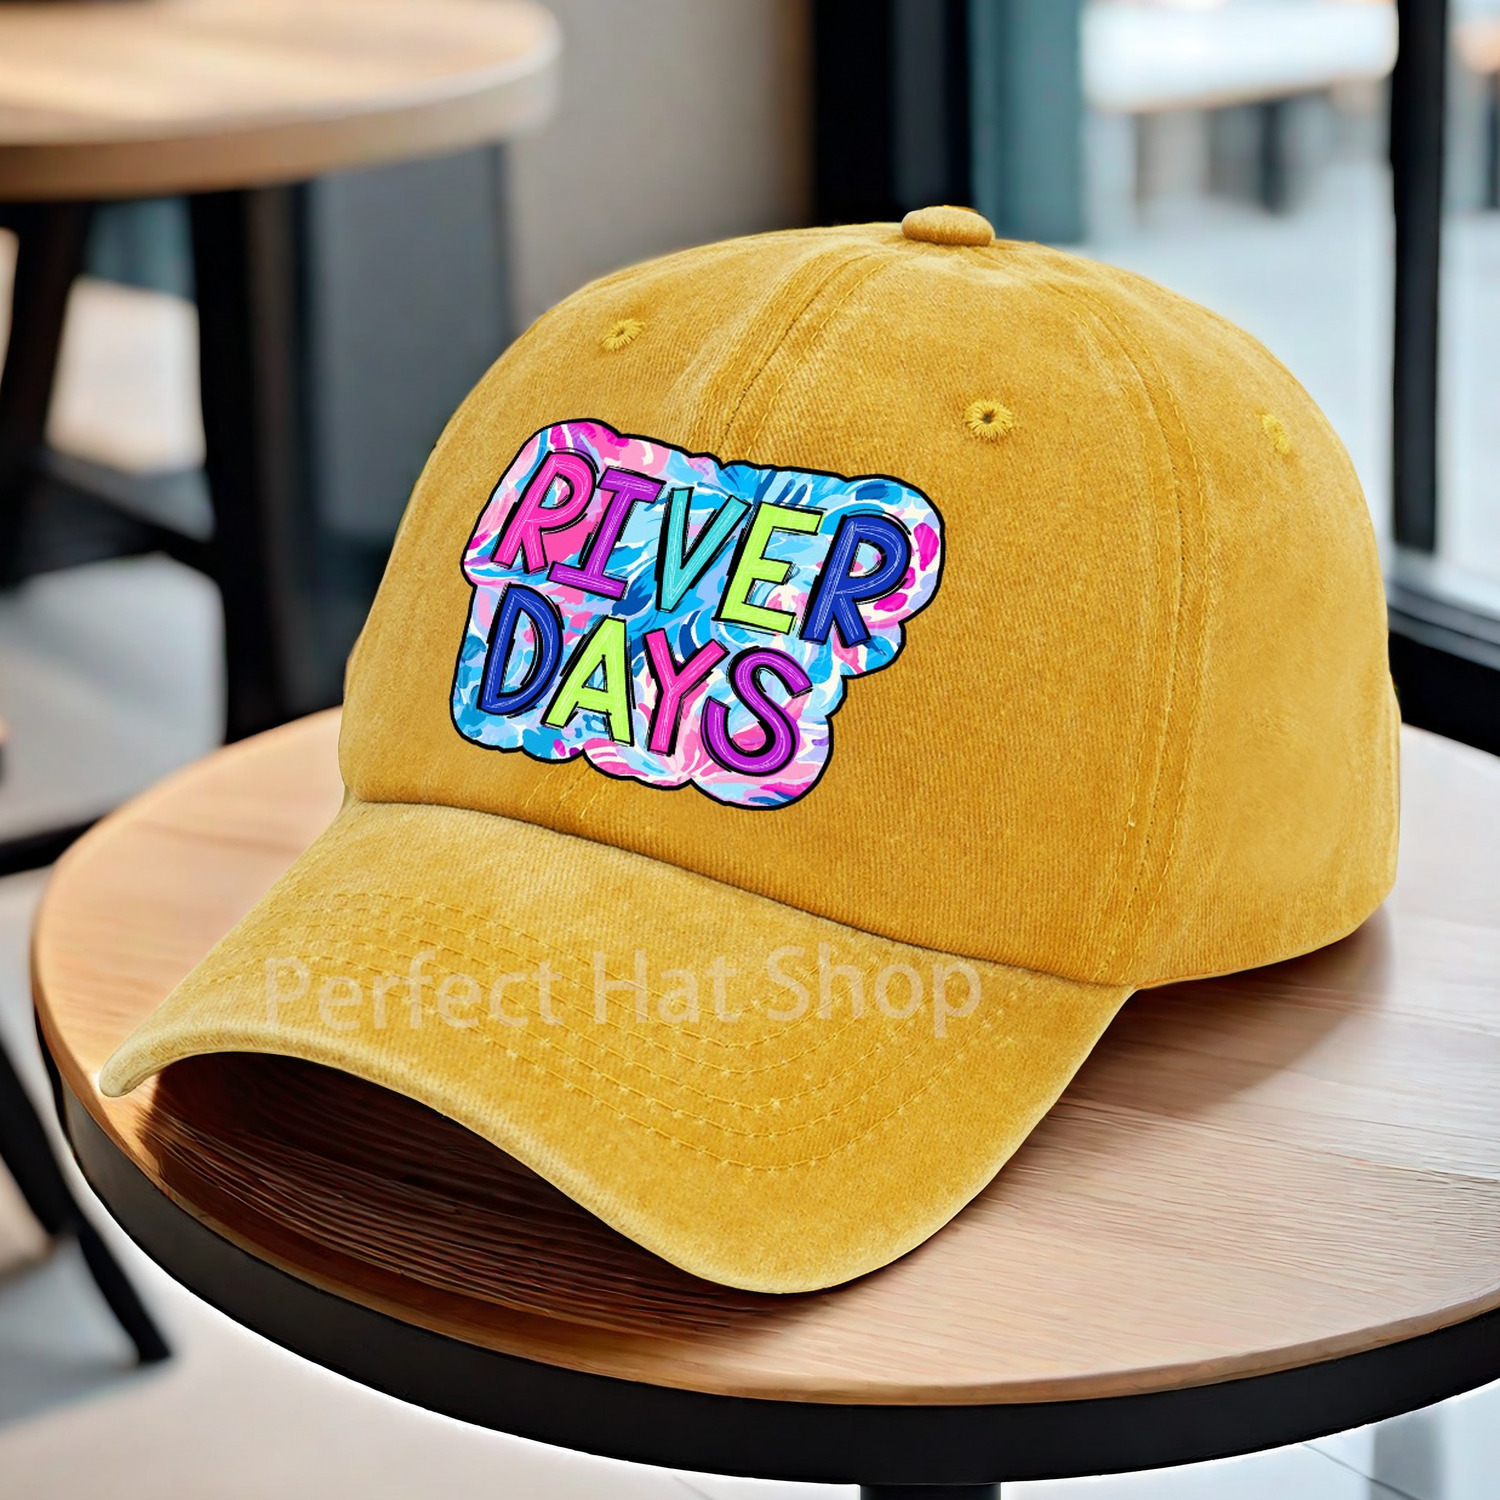 

river Days" Graphic Baseball Cap, Adjustable Fit Curved Brim Hat, Multiple Color Options, Unisex Casual Headwear For Various Occasions